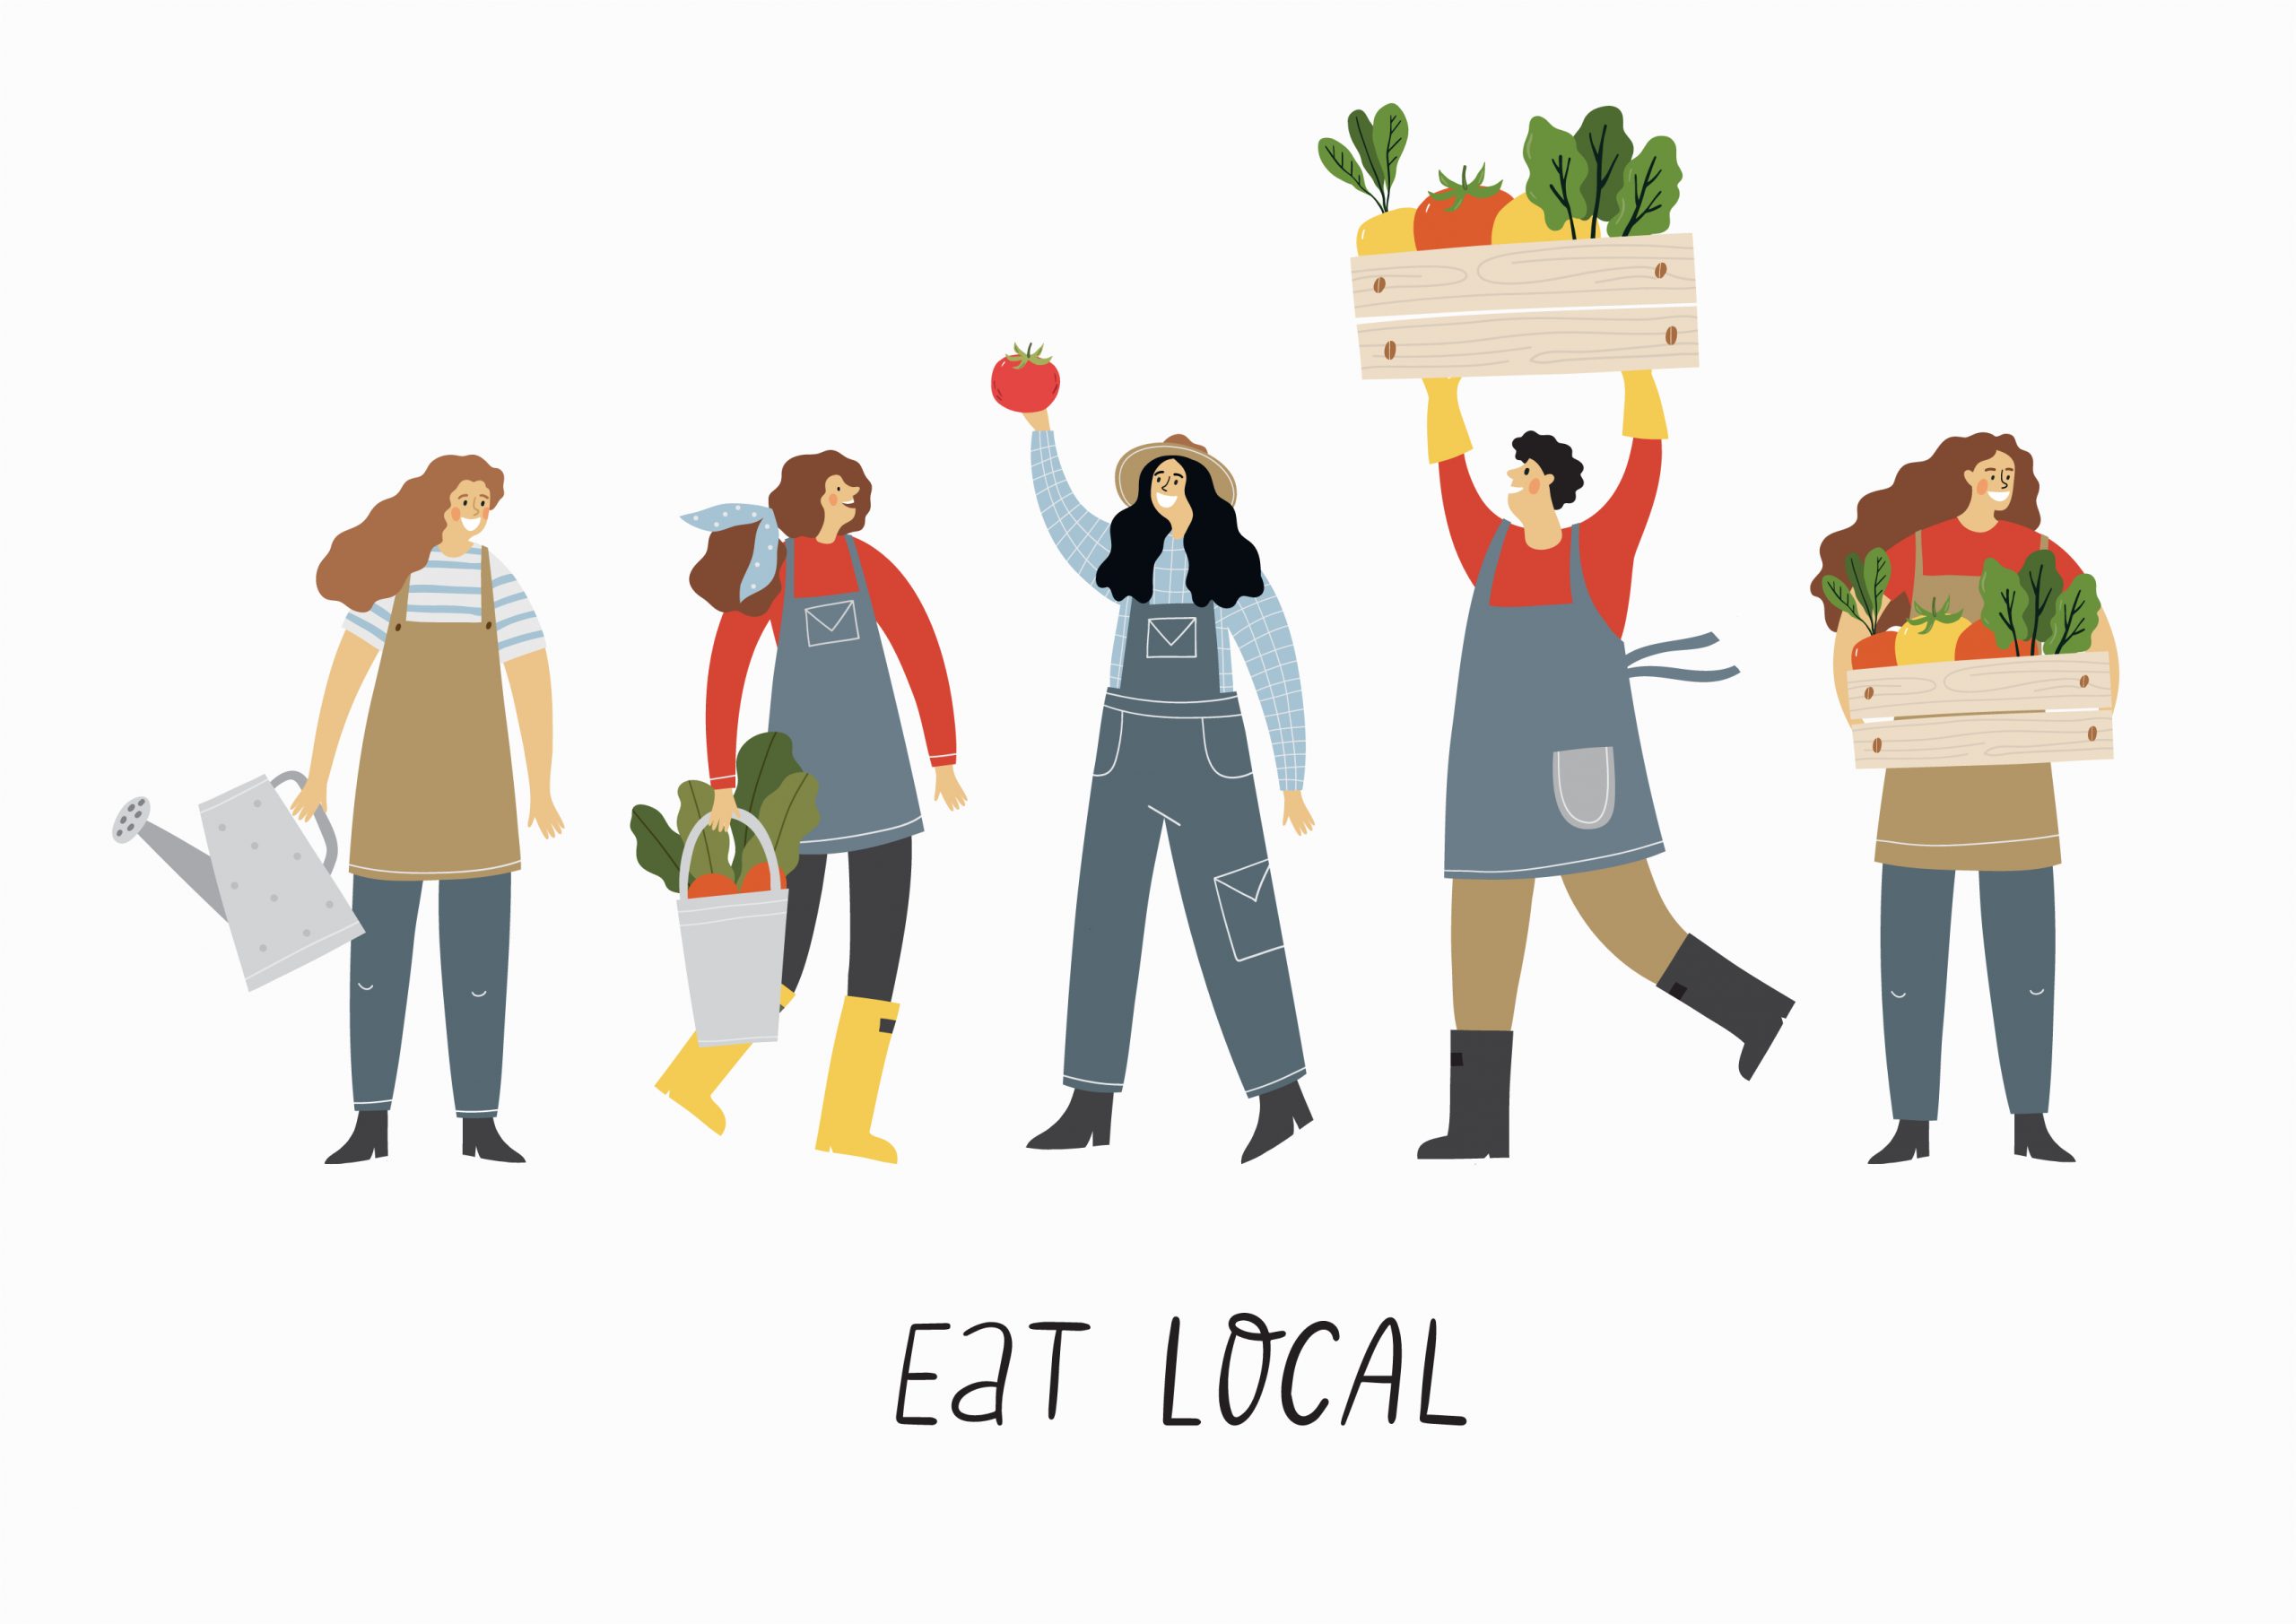 A graphic to demonstrate eating locally